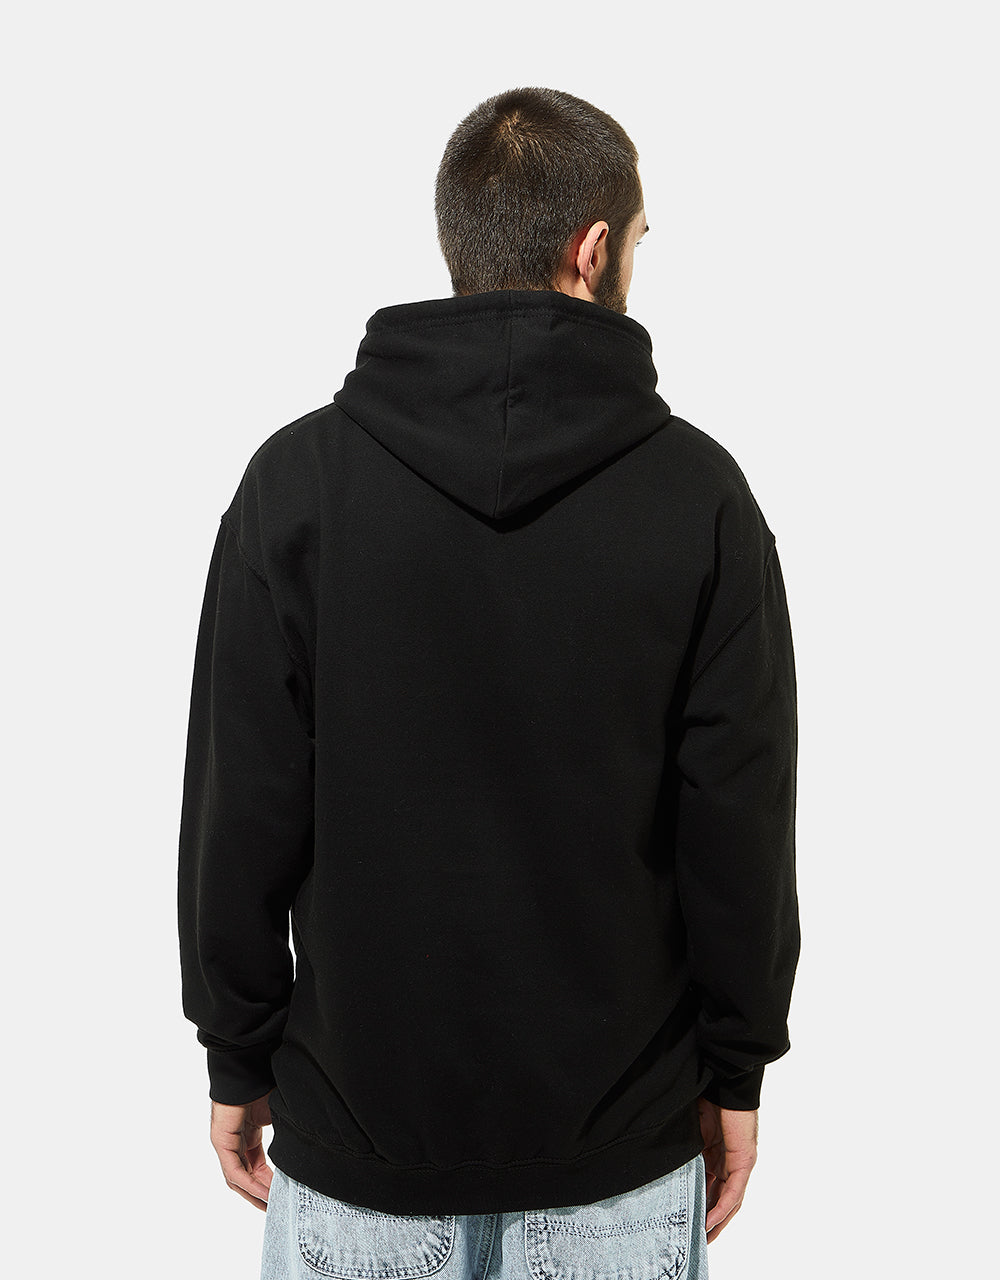 Route One Sorcery Pullover Hoodie - Black